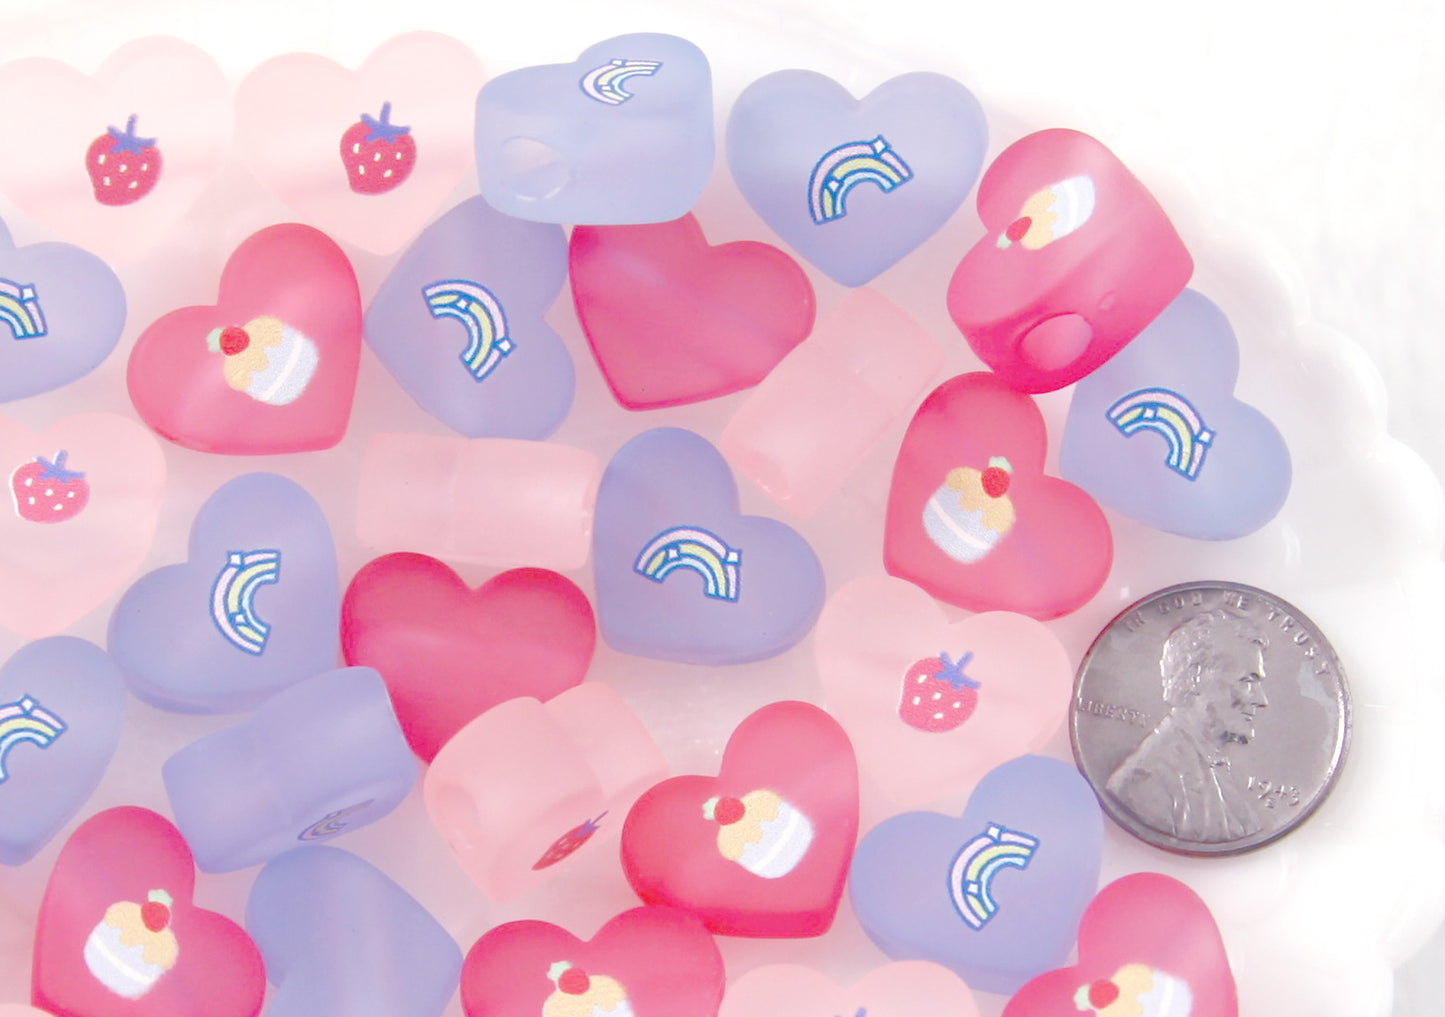 Pastel Heart Beads - 22mm Frosted Pastel Beads with Cute Printed Design - Strawberry, Cupcake, Rainbow - Acrylic or Resin Beads - 15 pcs set